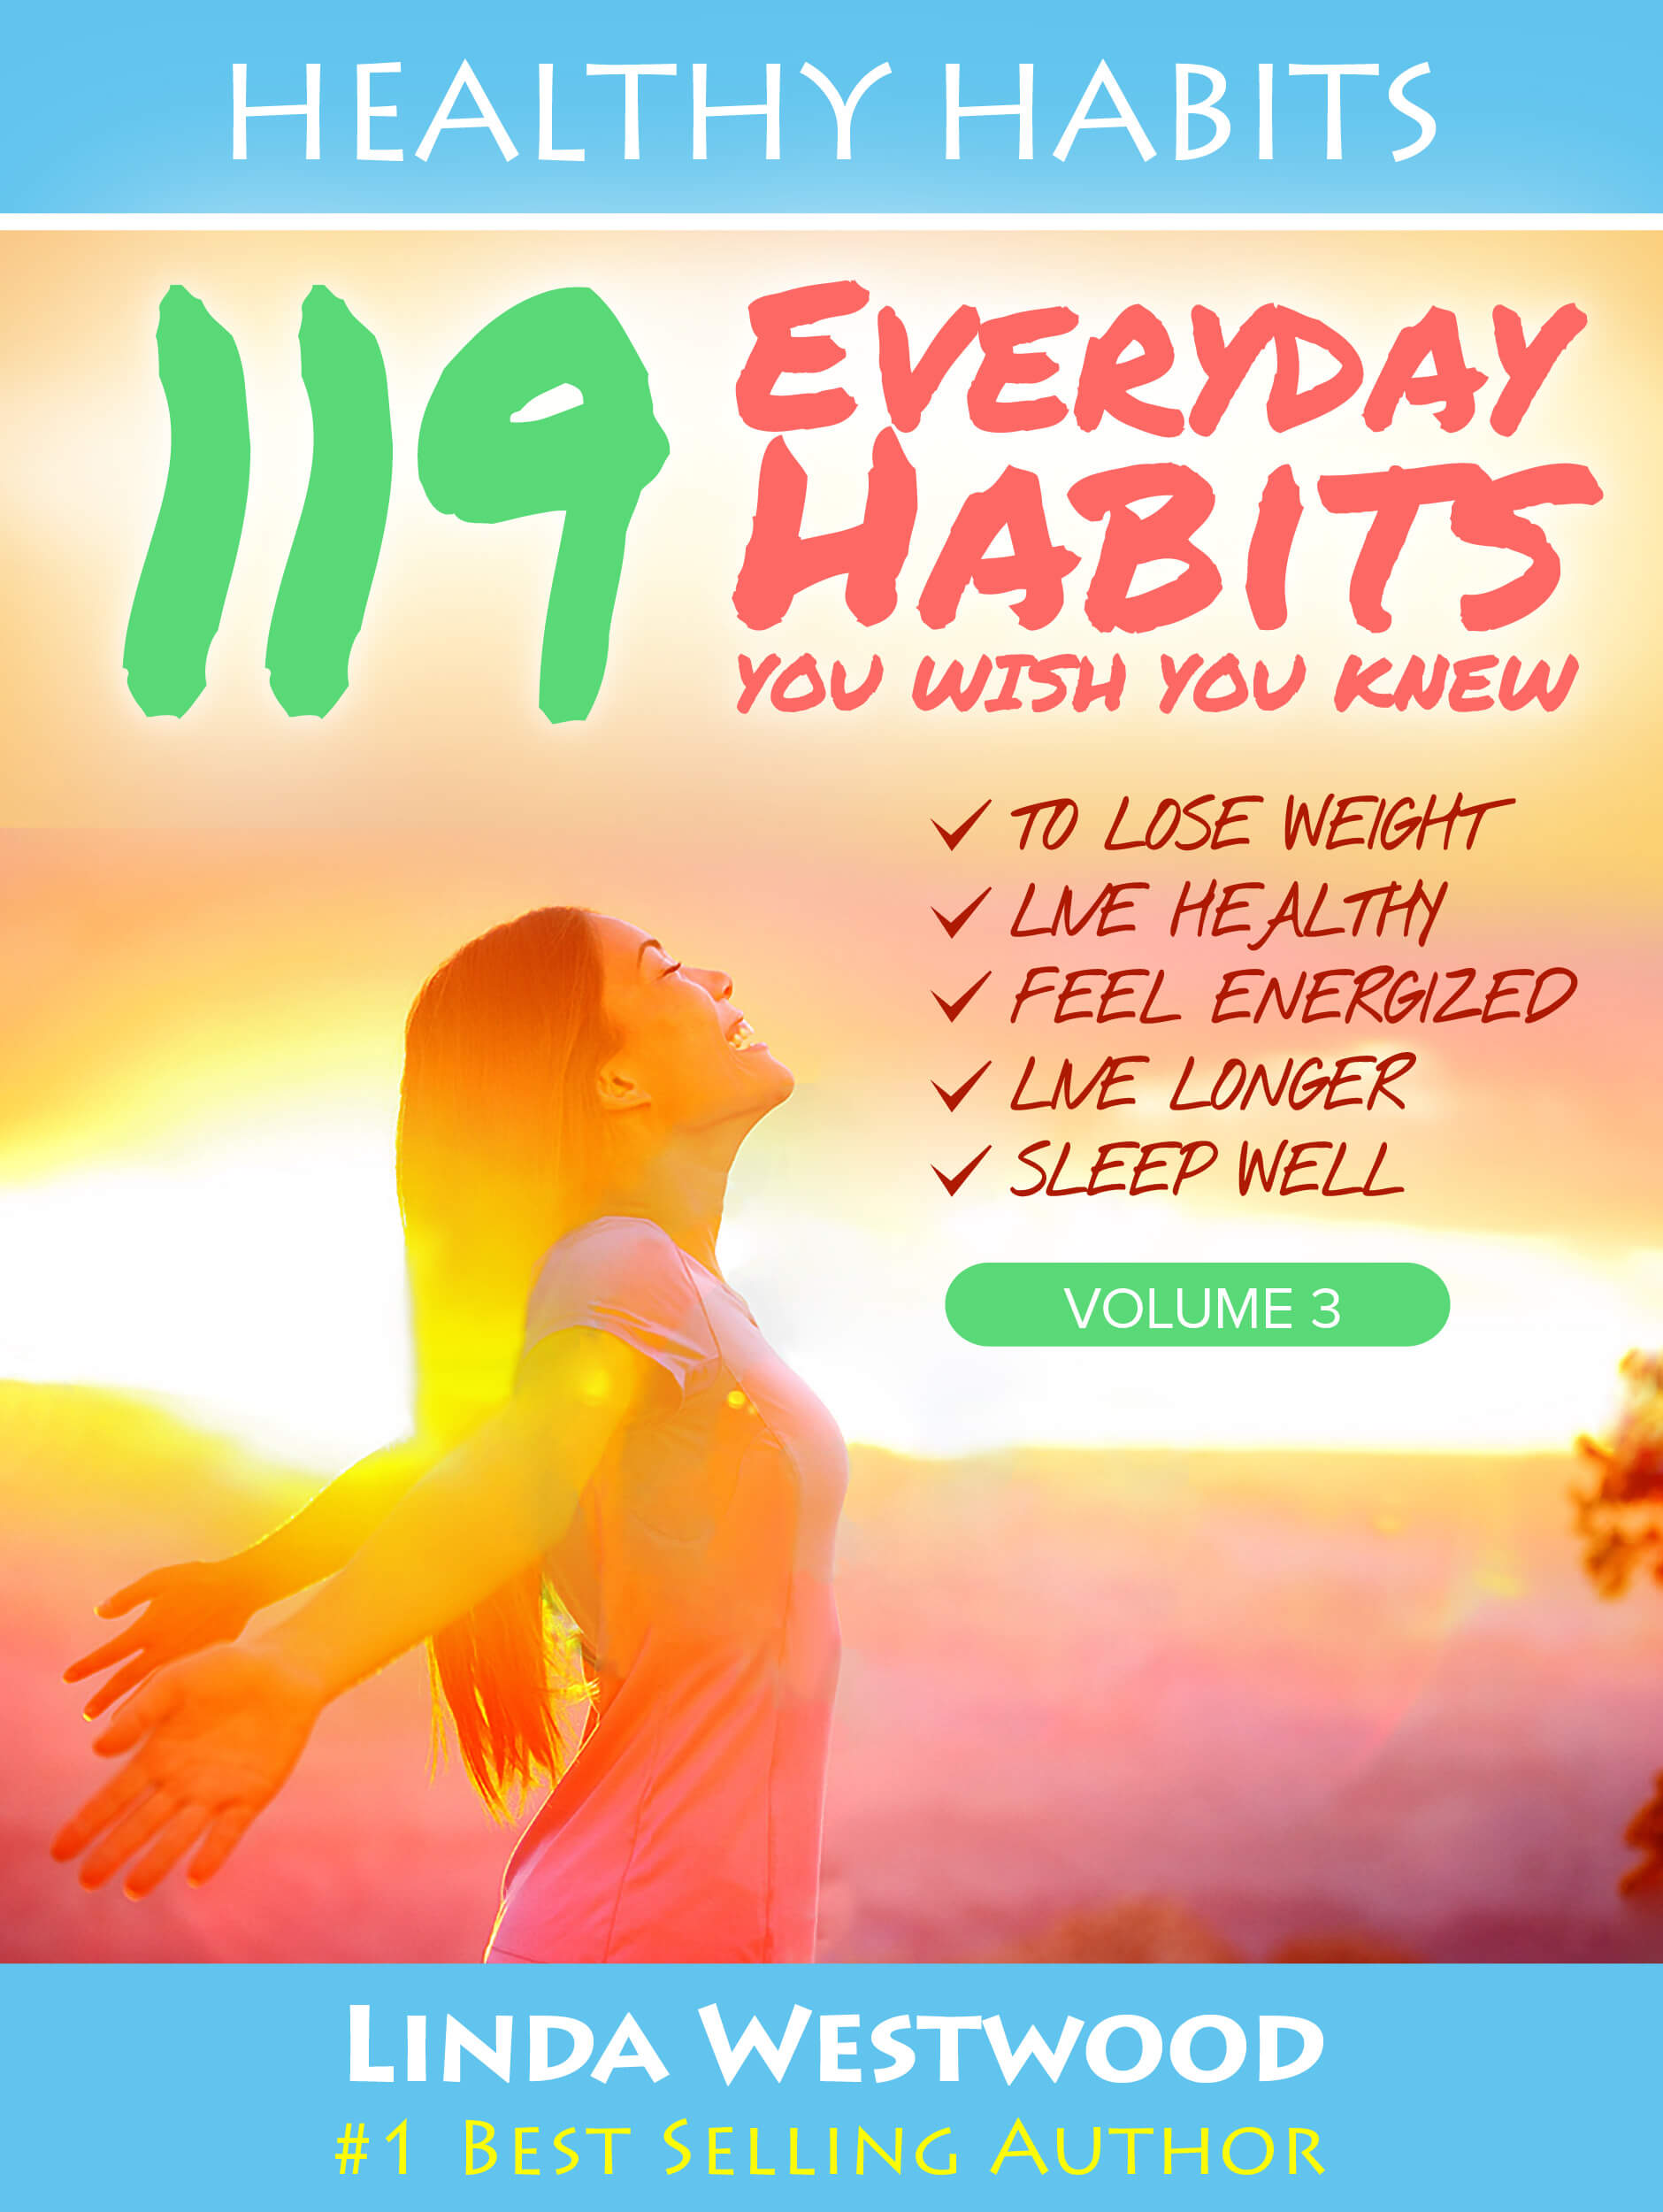 FREE: Healthy Habits Vol 3: 119 Everyday Habits You WISH You KNEW to Lose Weight, Live Healthy, Feel Energized, Live Longer & Sleep Well! by Linda Westwood